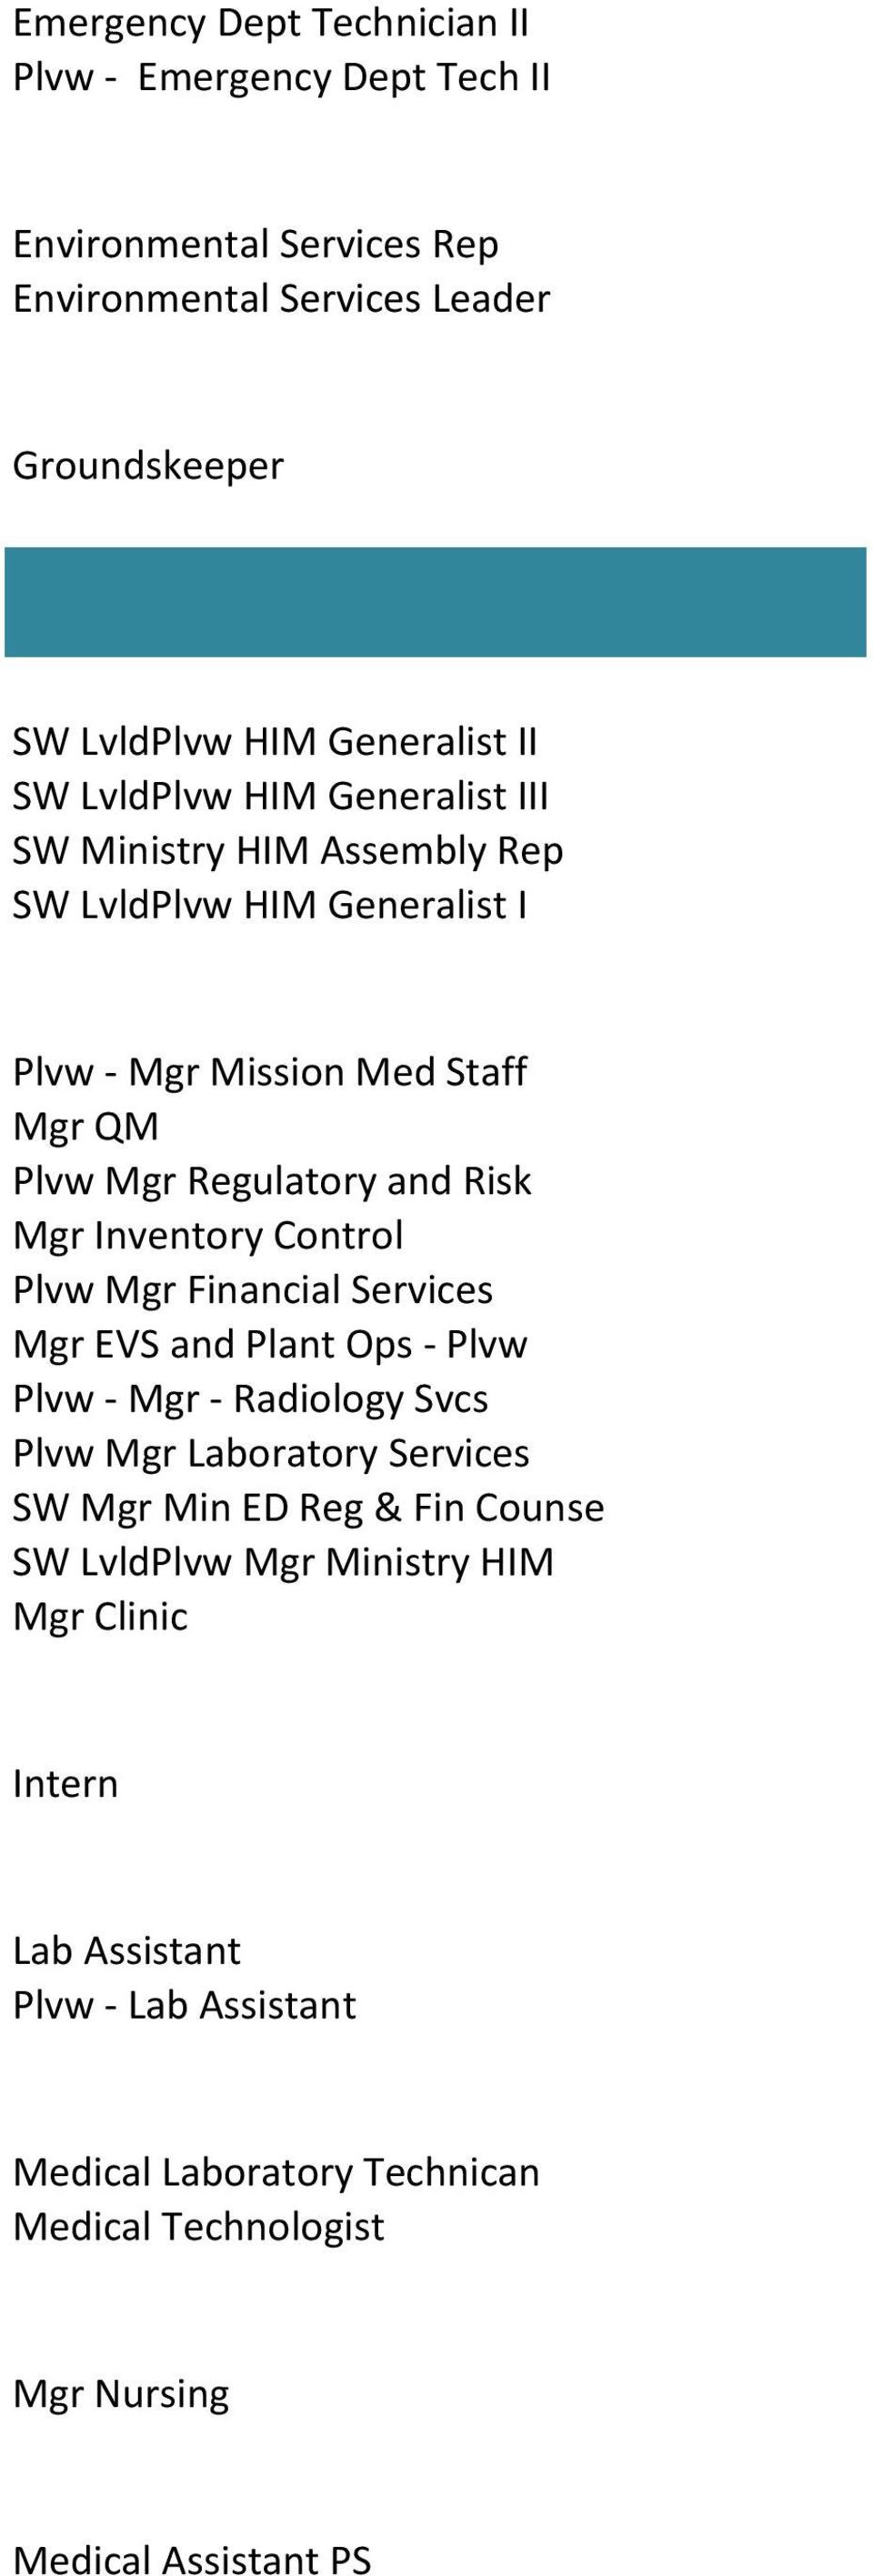 Inventory Control Plvw Mgr Financial Services Mgr EVS and Plant Ops - Plvw Plvw - Mgr - Radiology Svcs Plvw Mgr Laboratory Services SW Mgr Min ED Reg & Fin